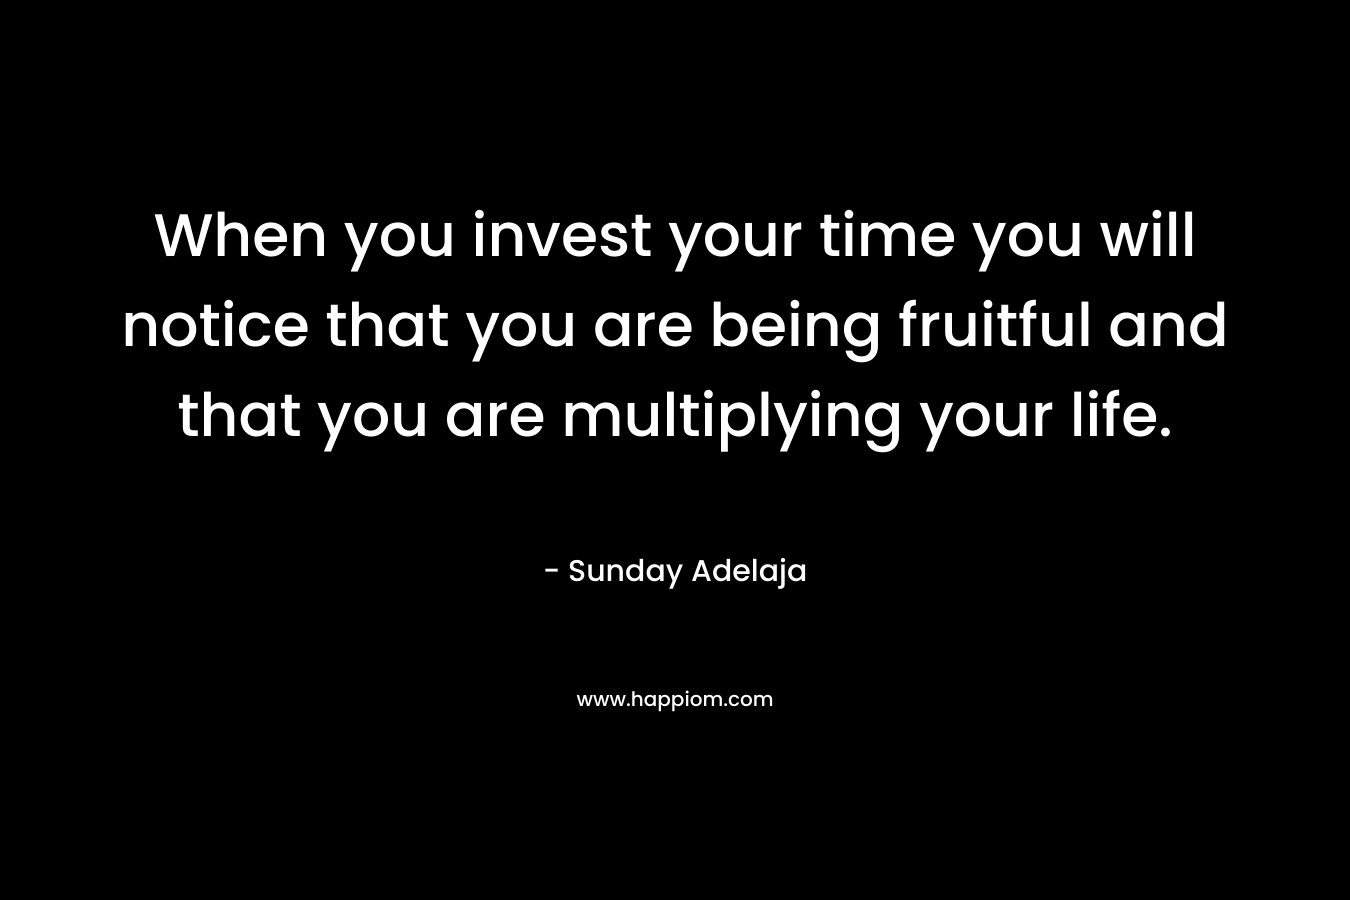 When you invest your time you will notice that you are being fruitful and that you are multiplying your life.